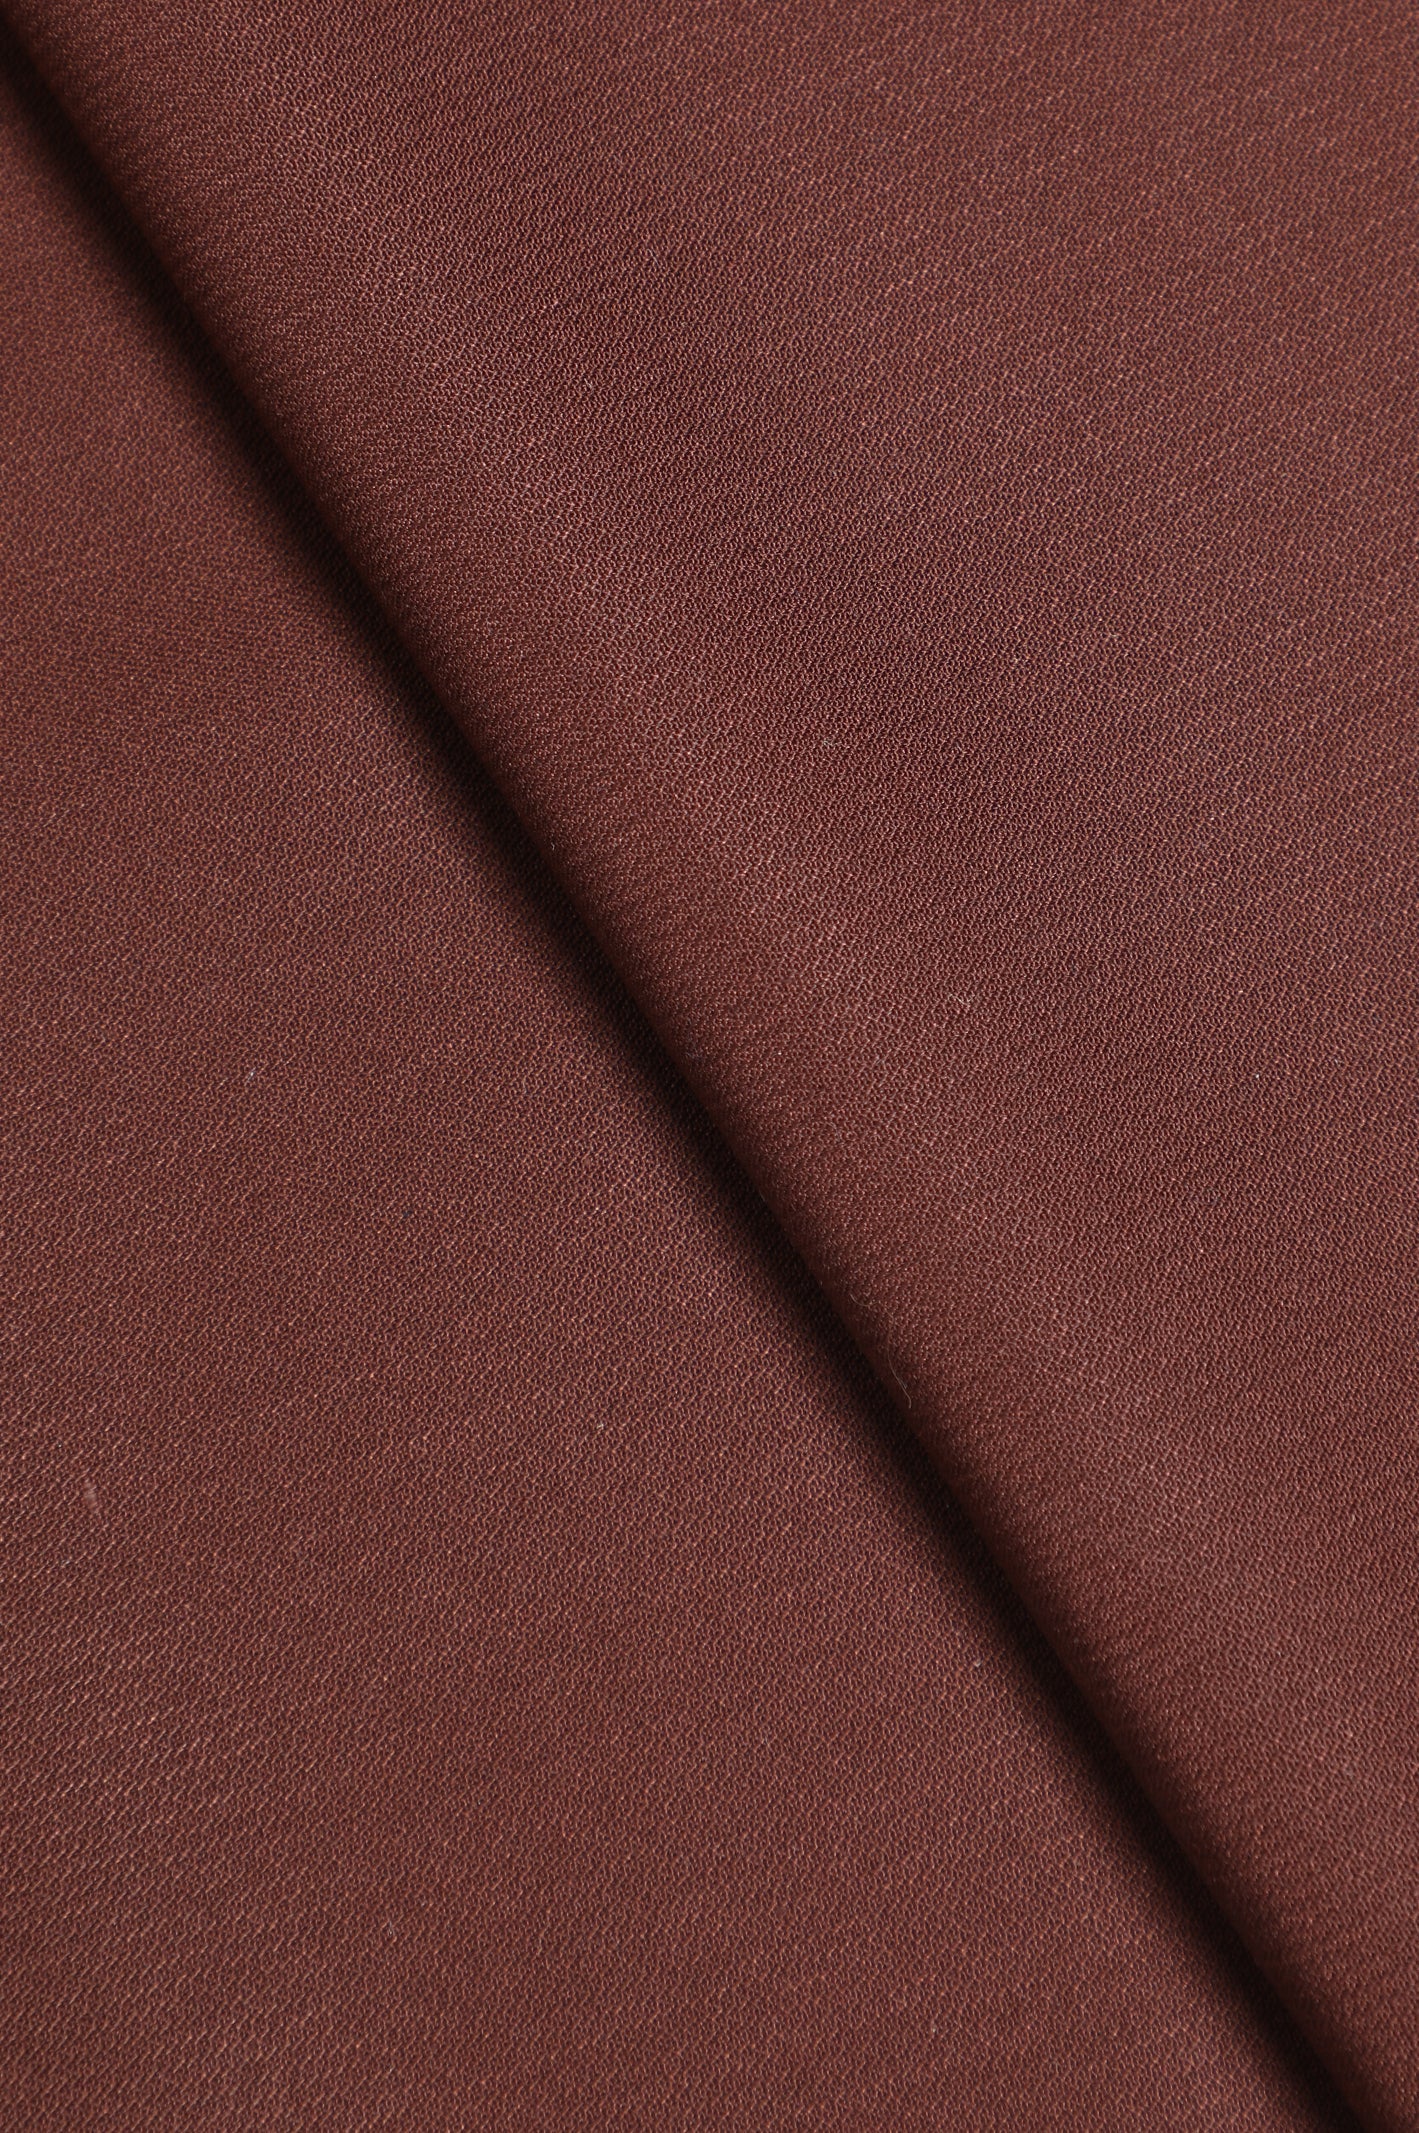 Unstitched Fabric for Men SKU: US0199-BROWN - Diners